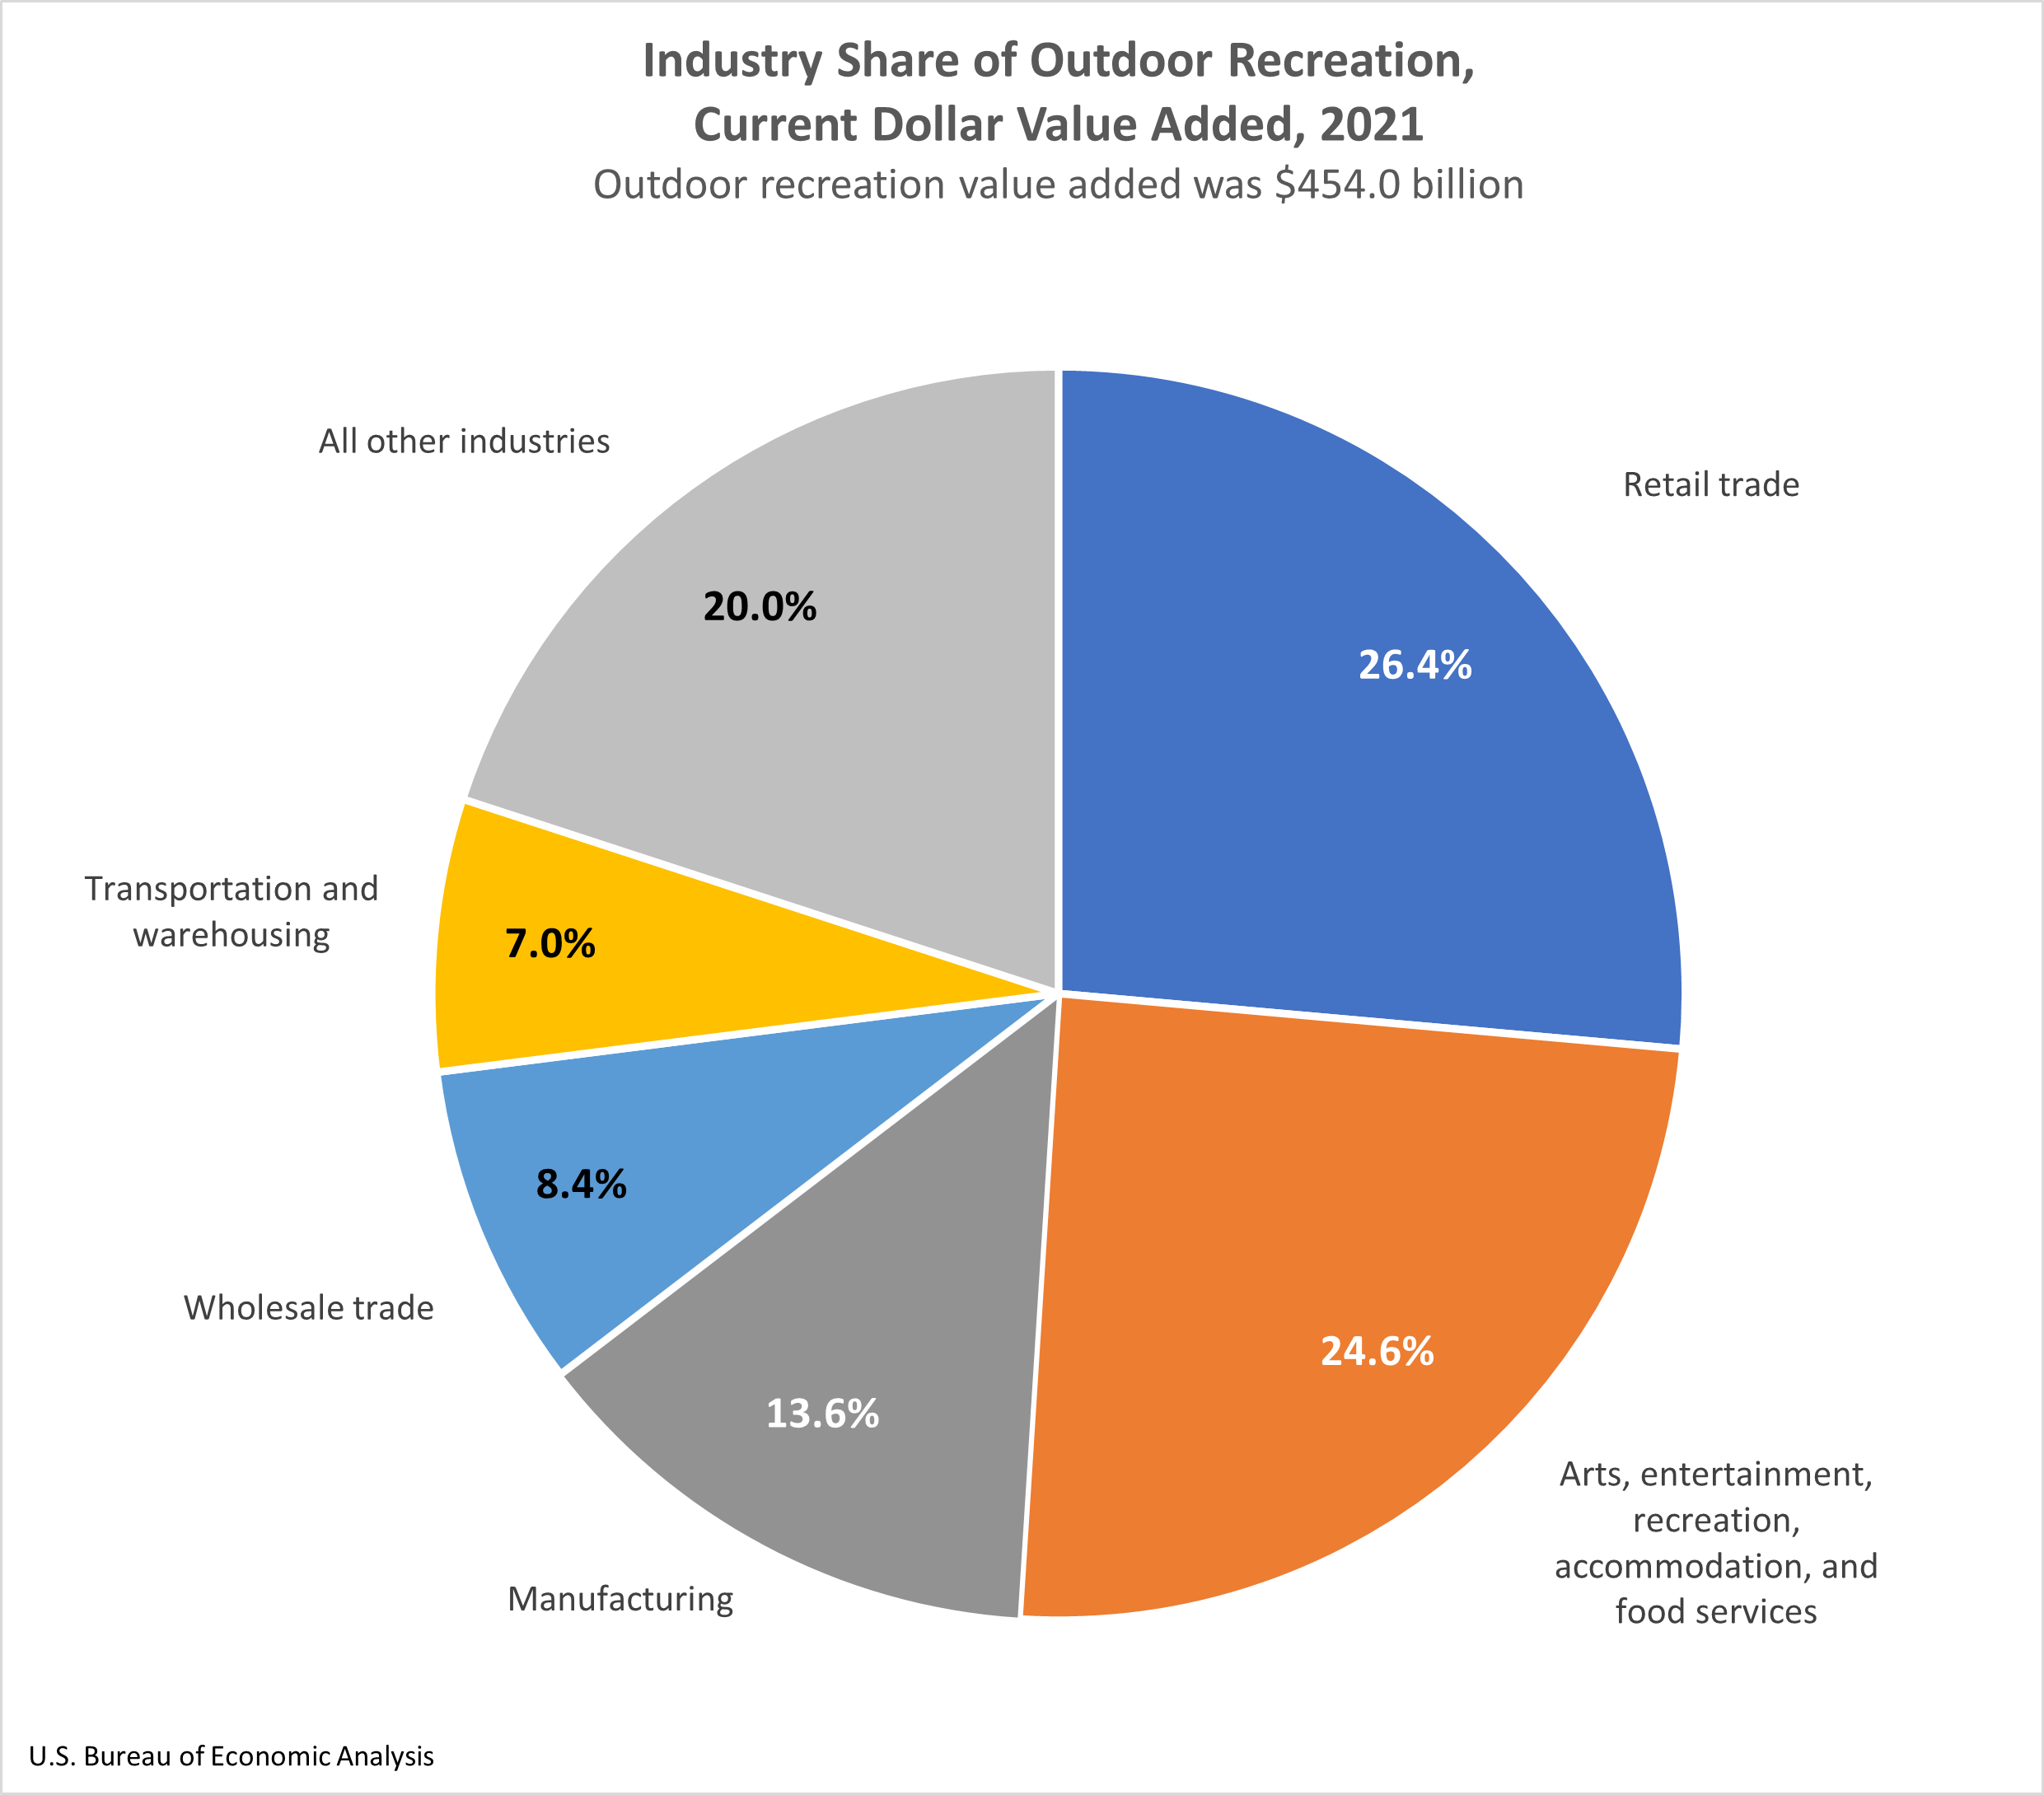 Industry Share of Outdoor Recreation, Current Dollar Value Added, 2021